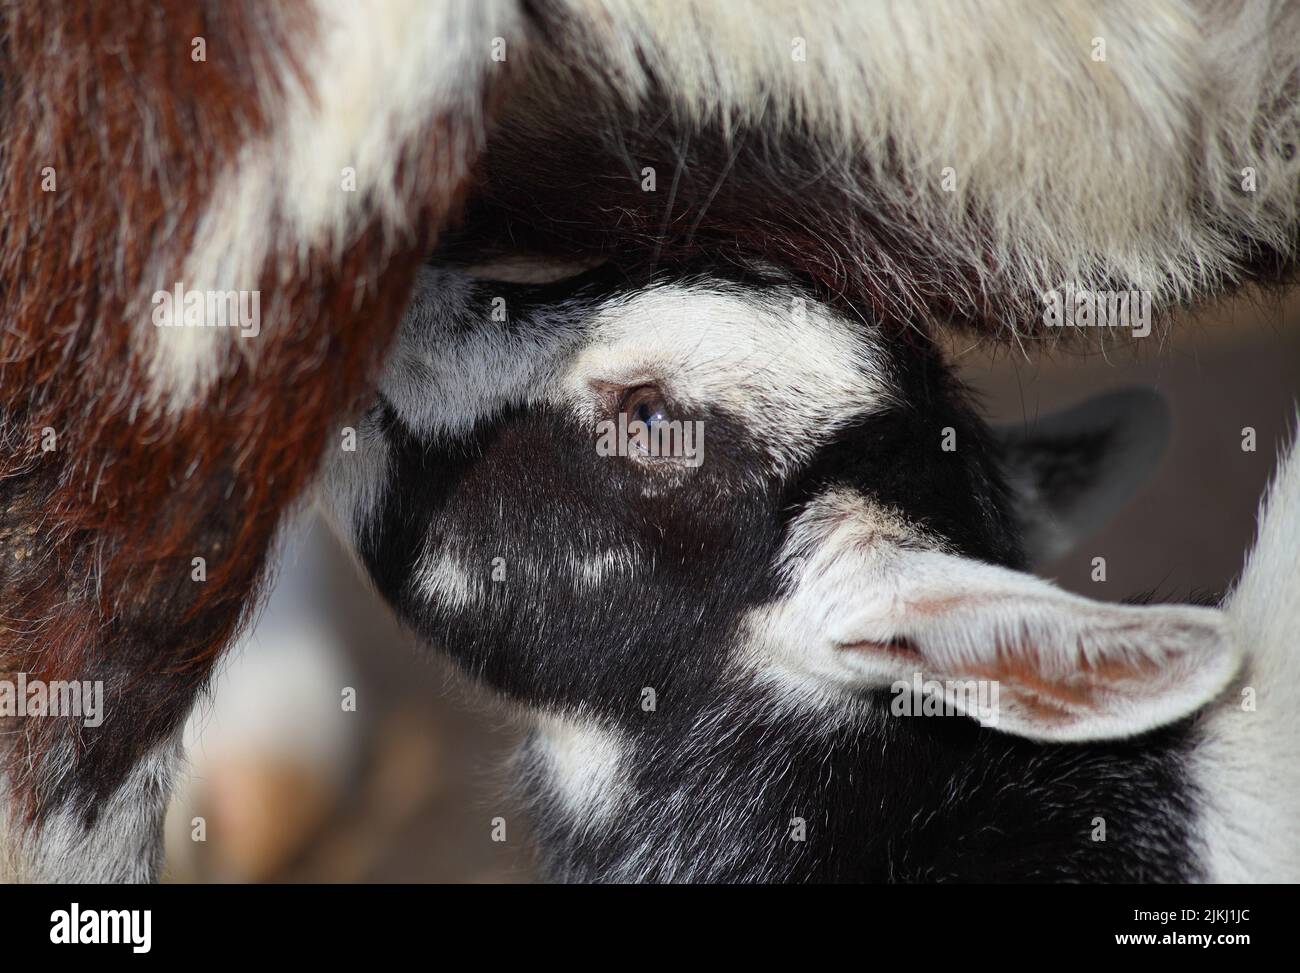 A closeup photo of a goat calf suckling from its mother - motherhood concept Stock Photo